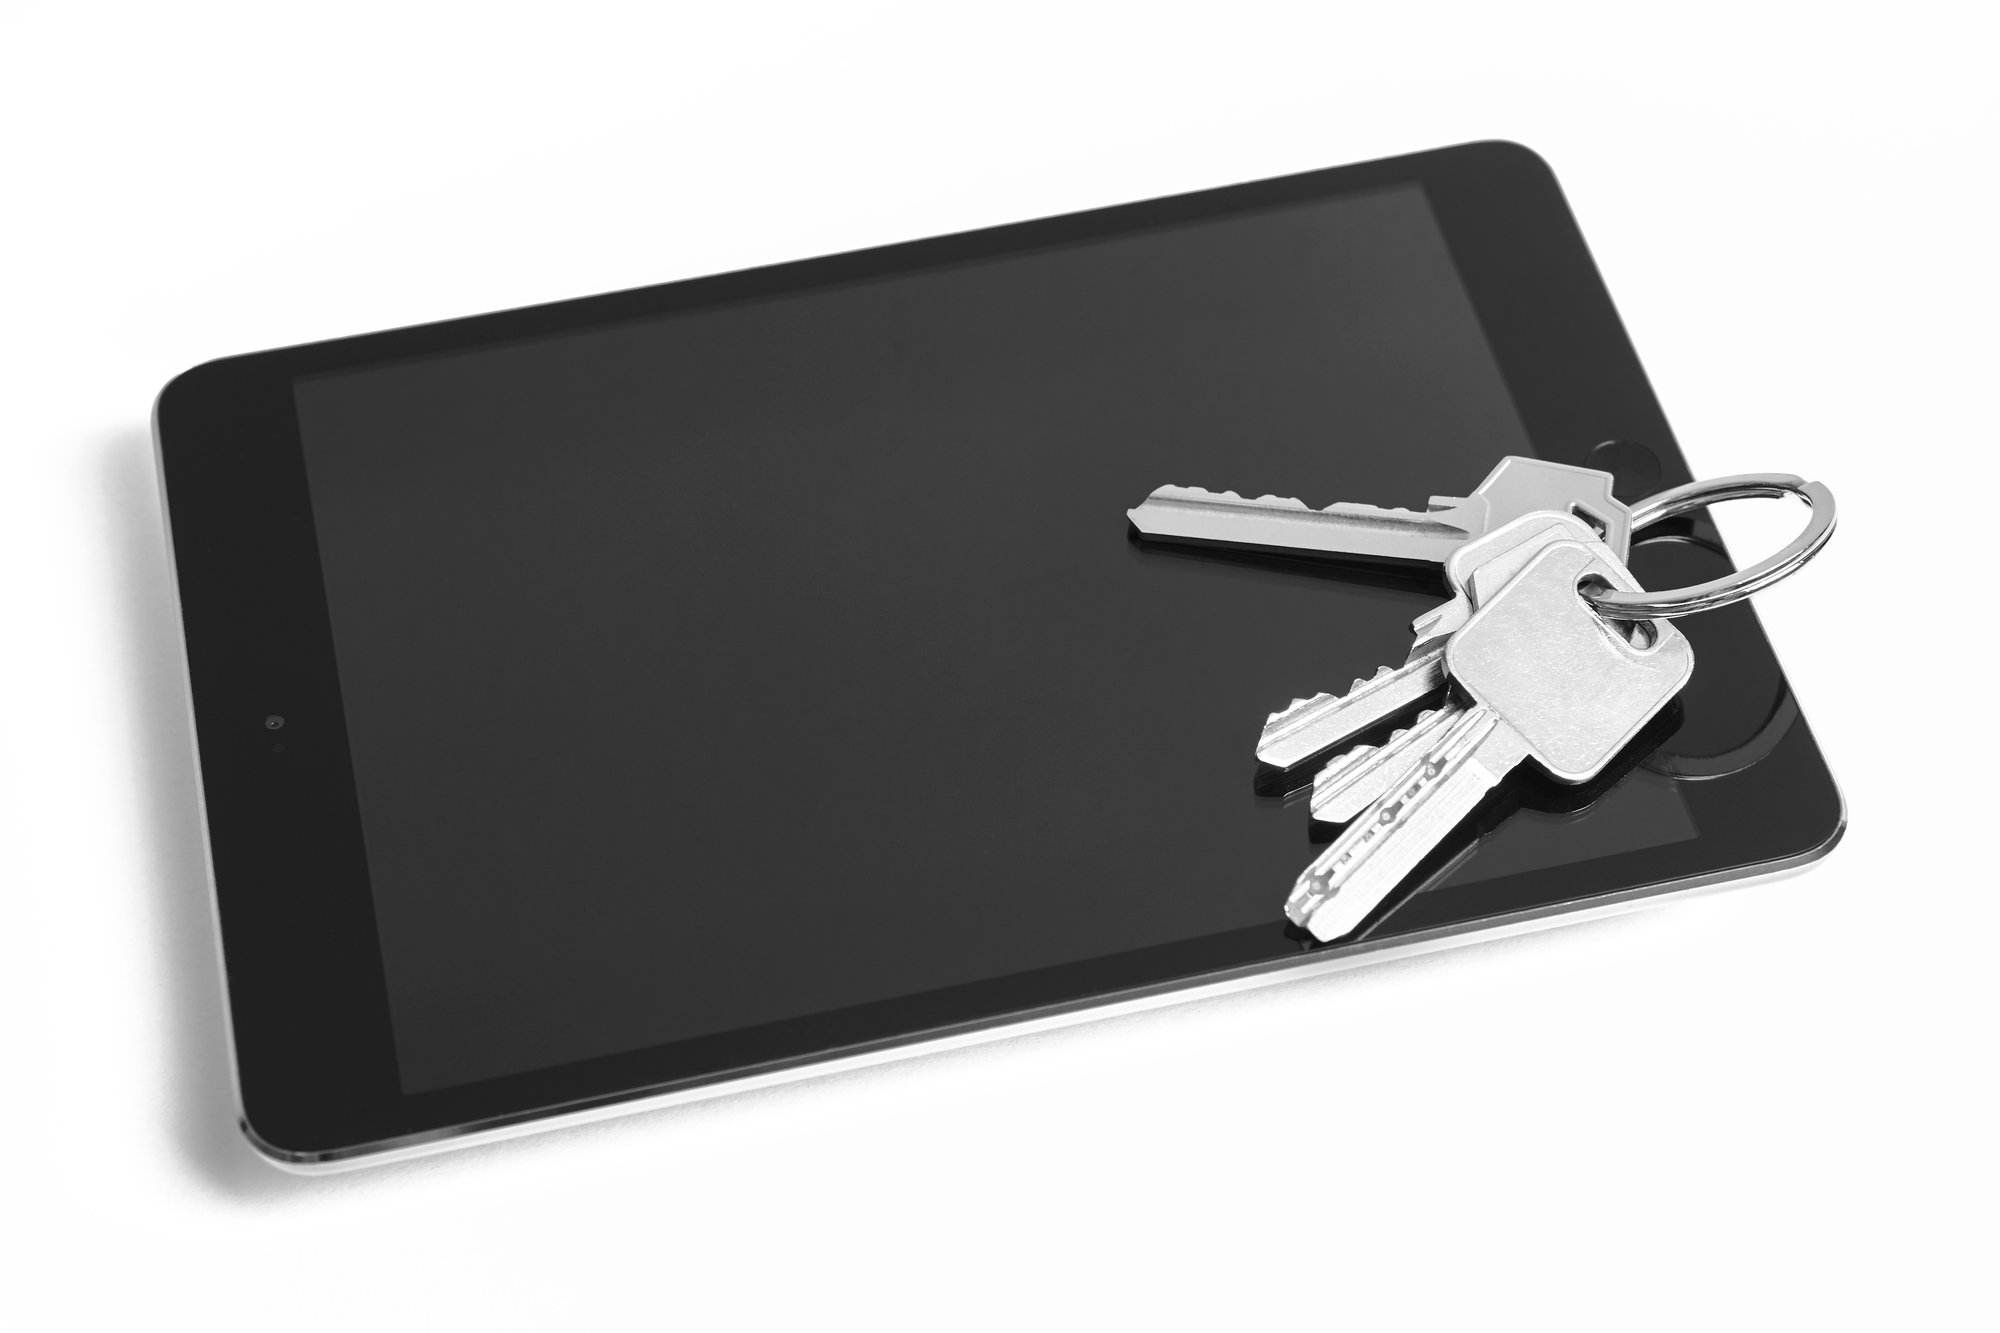 tablet-and-home-keys-isolated-on-white-buy-sell-2023-11-27-05-35-23-utc